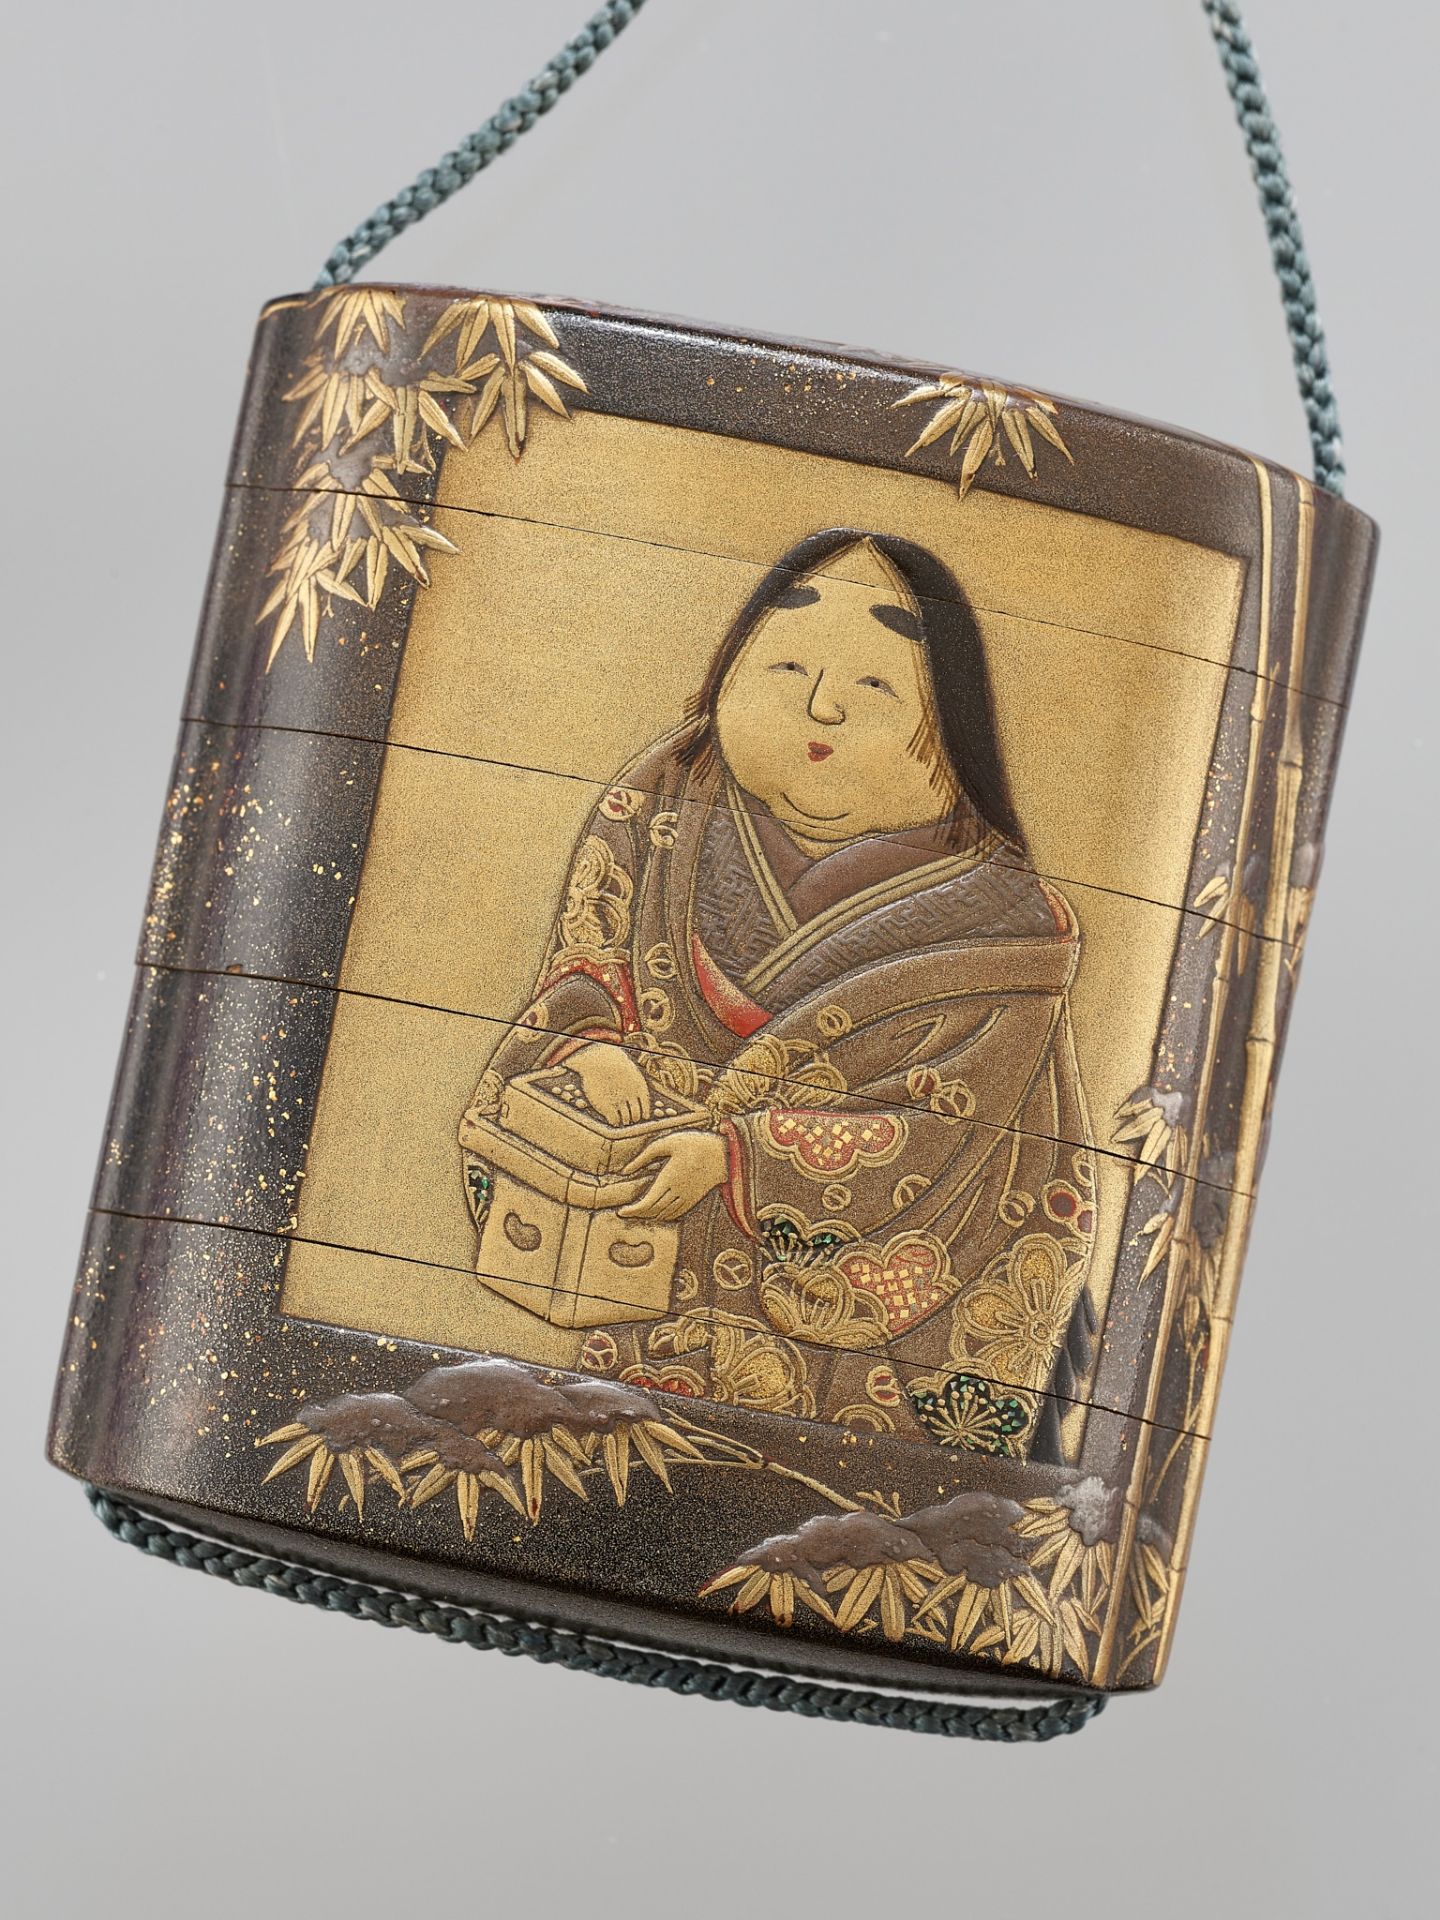 YOYUSAI: AN EXQUISITE SMALL LACQUER FOUR-CASE INRO DEPICTING OKAME AND ONI AT SETSUBUN - Image 3 of 8